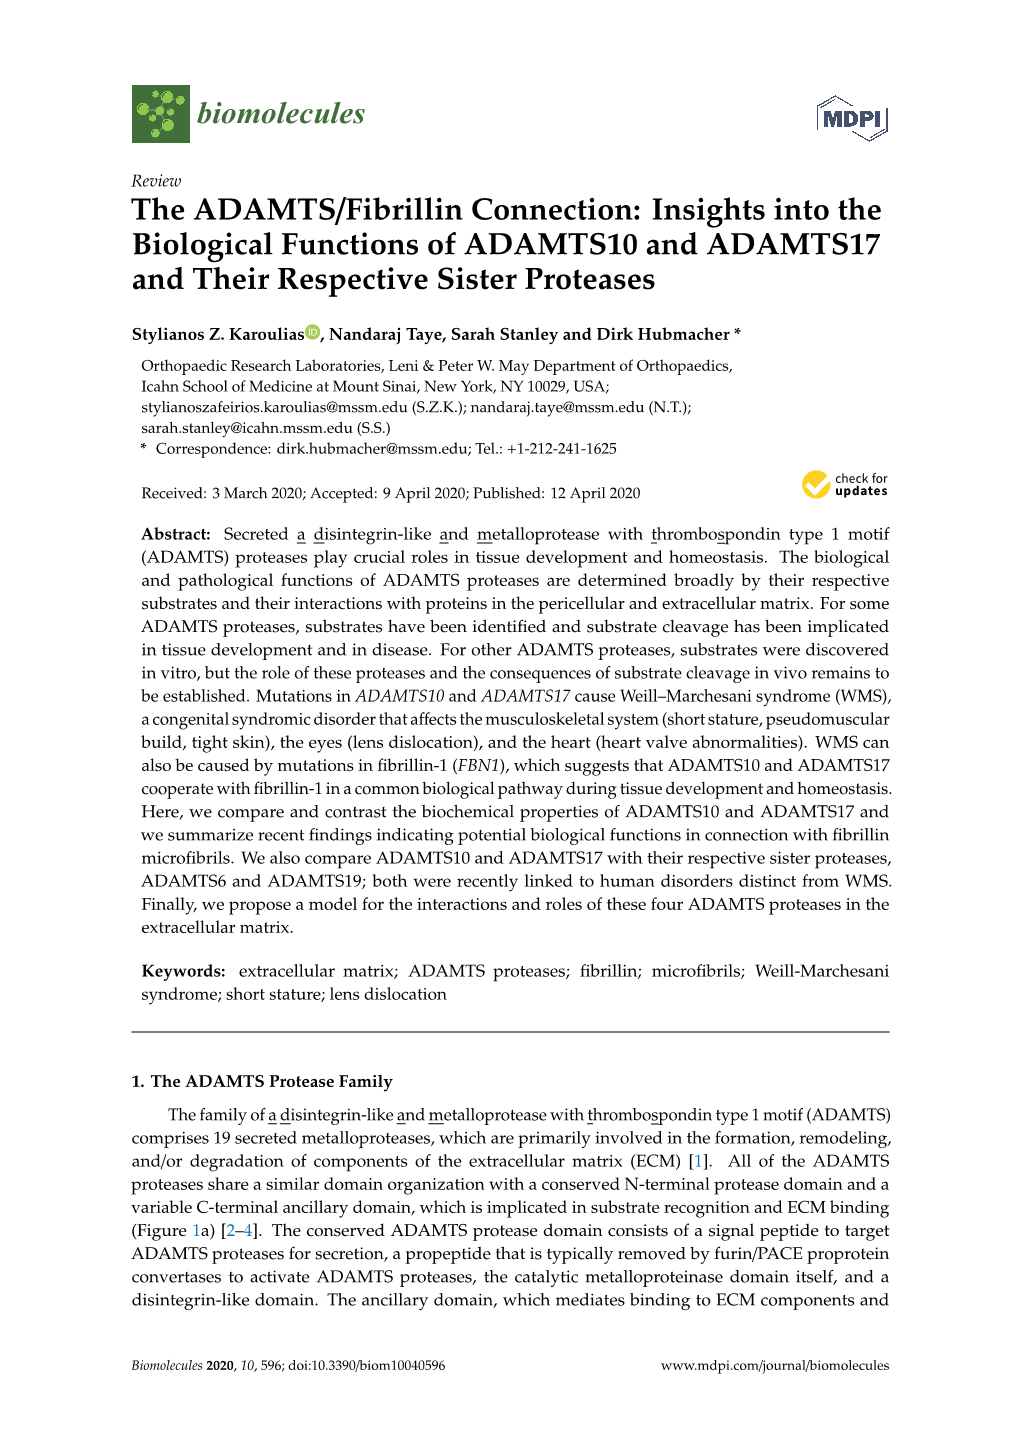 The ADAMTS/Fibrillin Connection: Insights Into the Biological Functions of ADAMTS10 and ADAMTS17 and Their Respective Sister Proteases